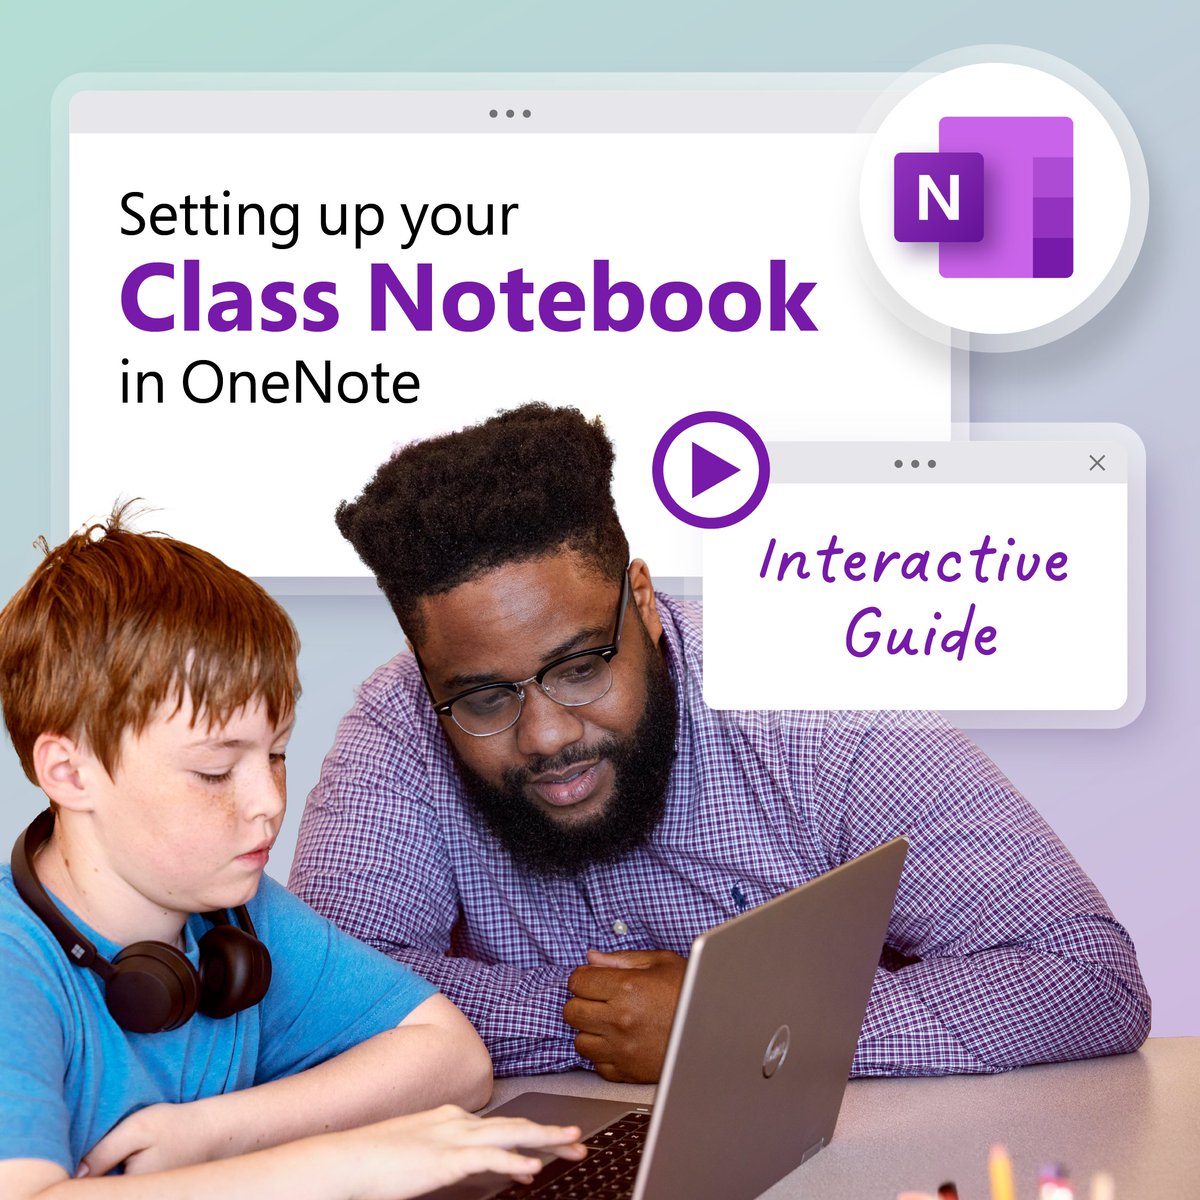 Whether you're new to your #OneNote journey or in need of a refresher, this guide is for you! Learn how to set up a Class Notebook, customize sections, and add content for students. msft.it/6017coqk3 #MIEExpert